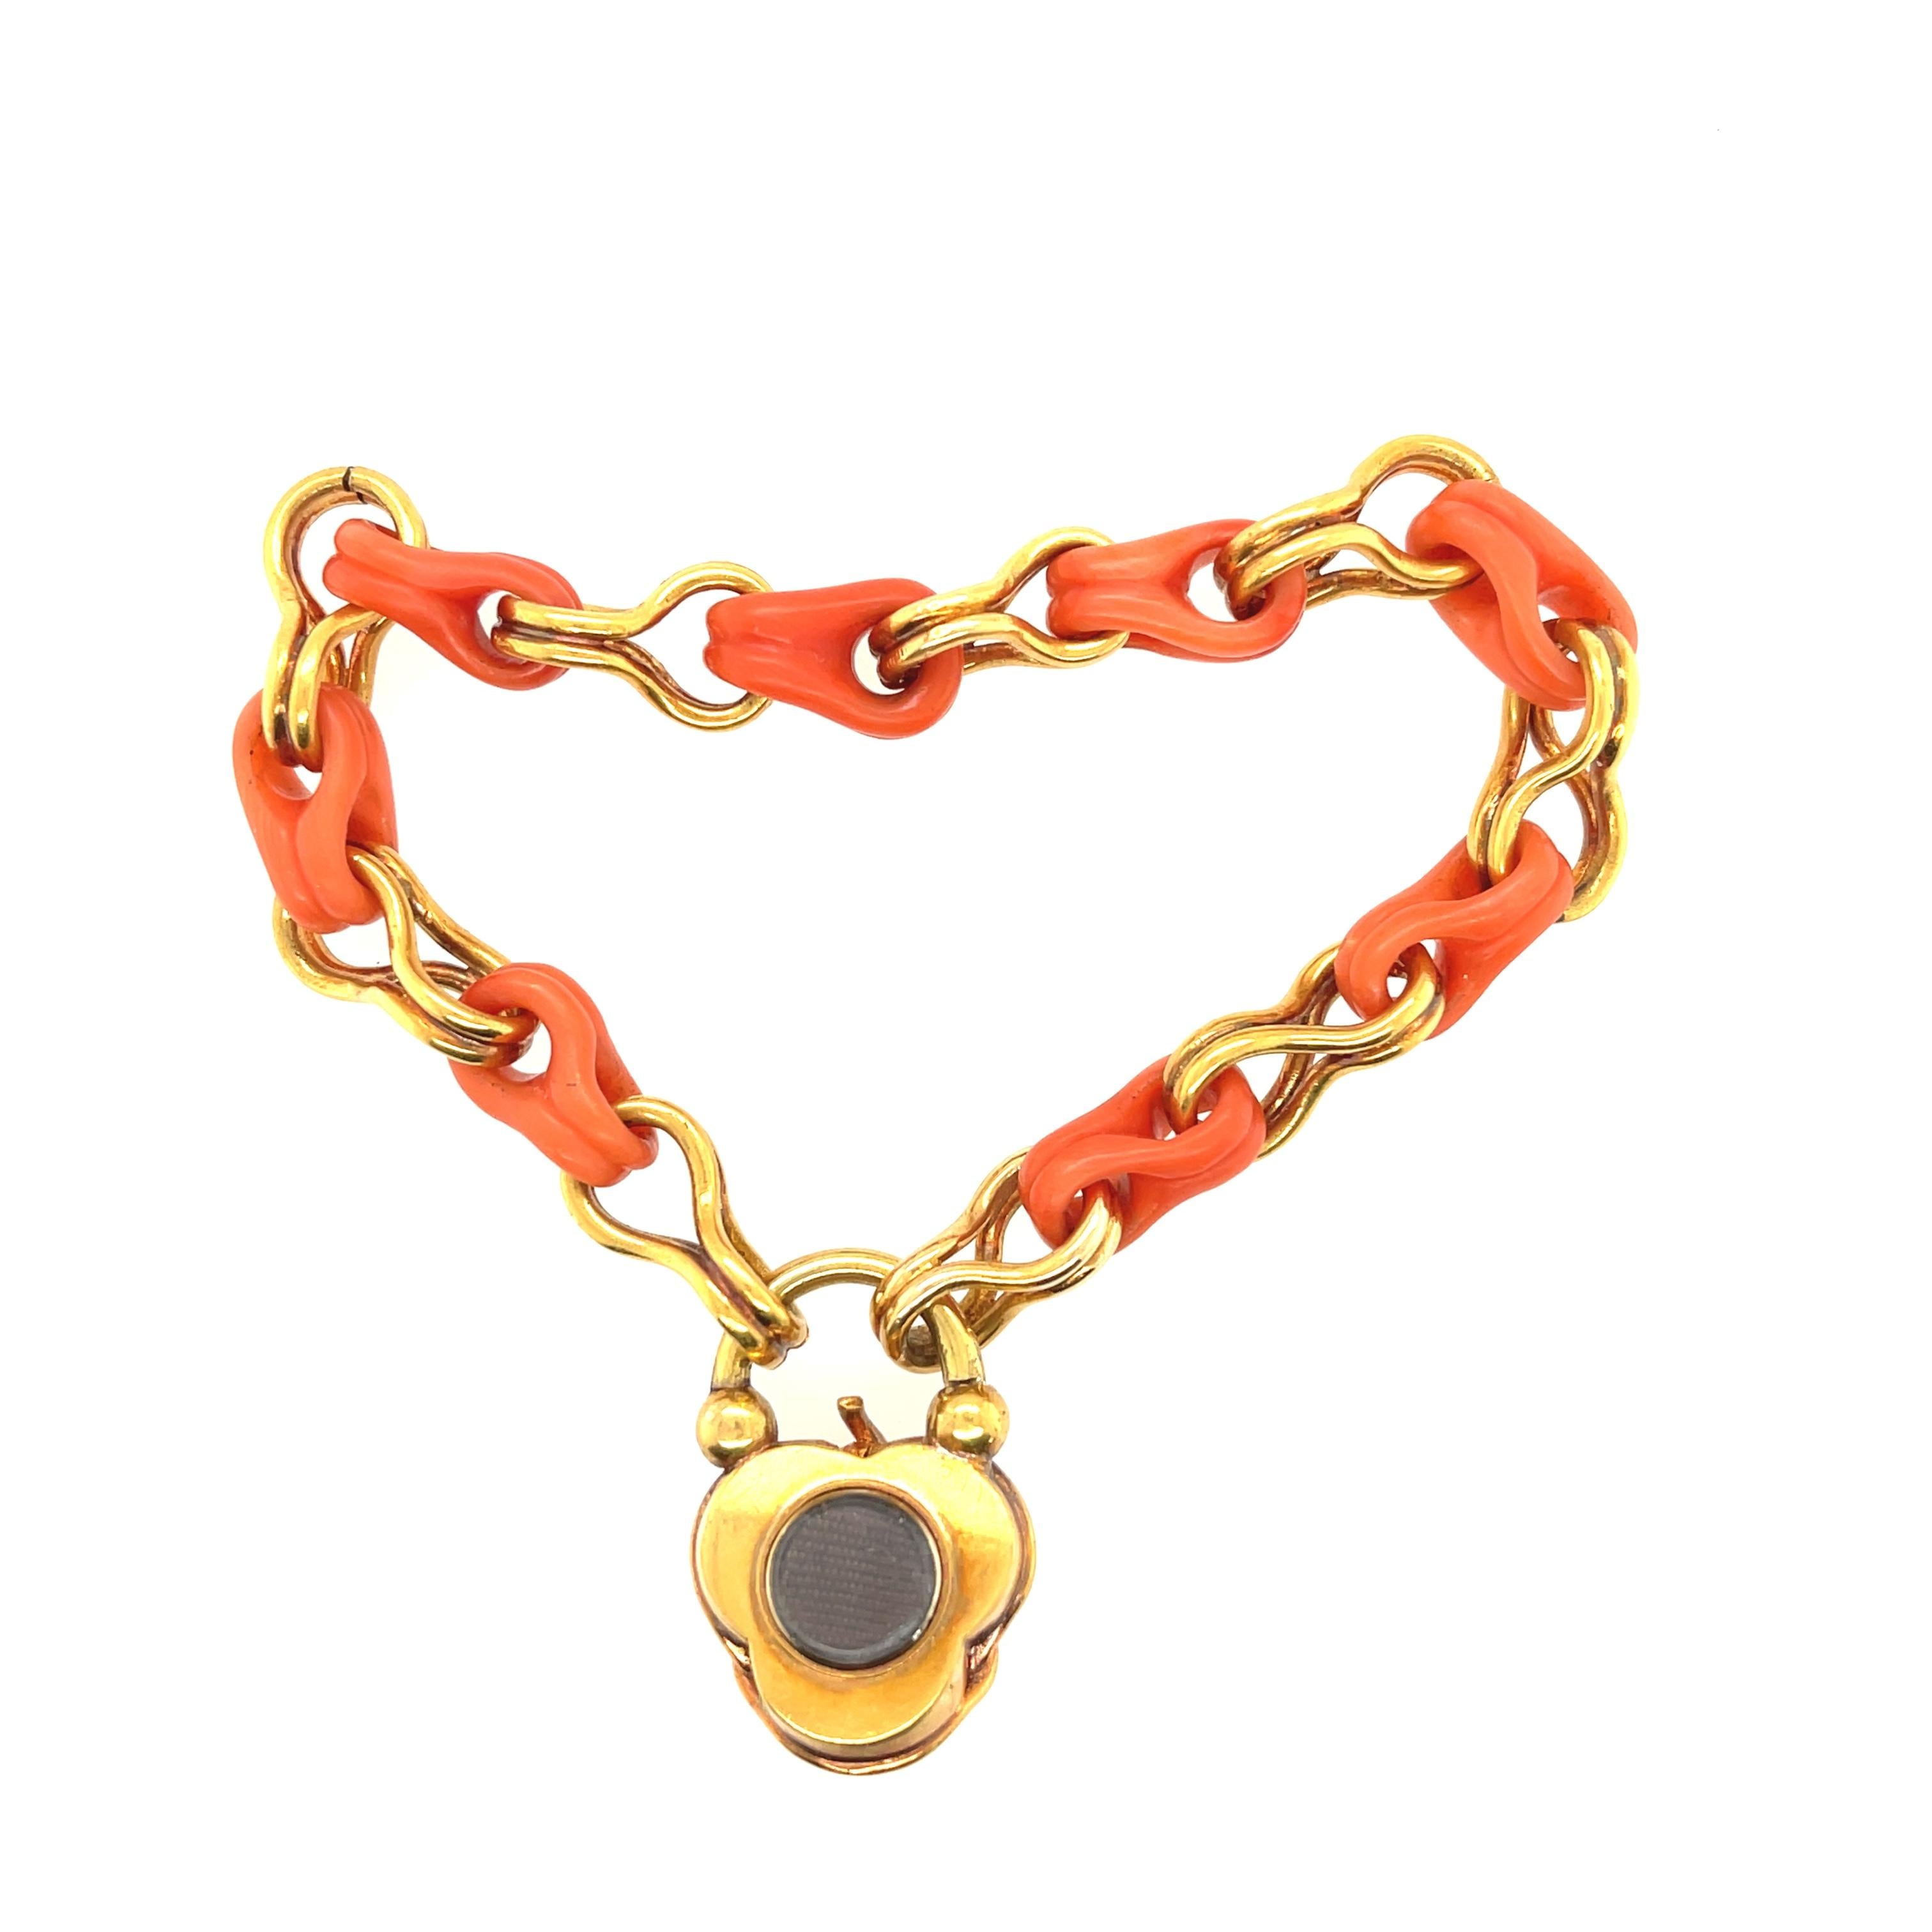 Mixed Cut Antique Victorian Gold and Coral Link Bracelet with Padlock Clasp